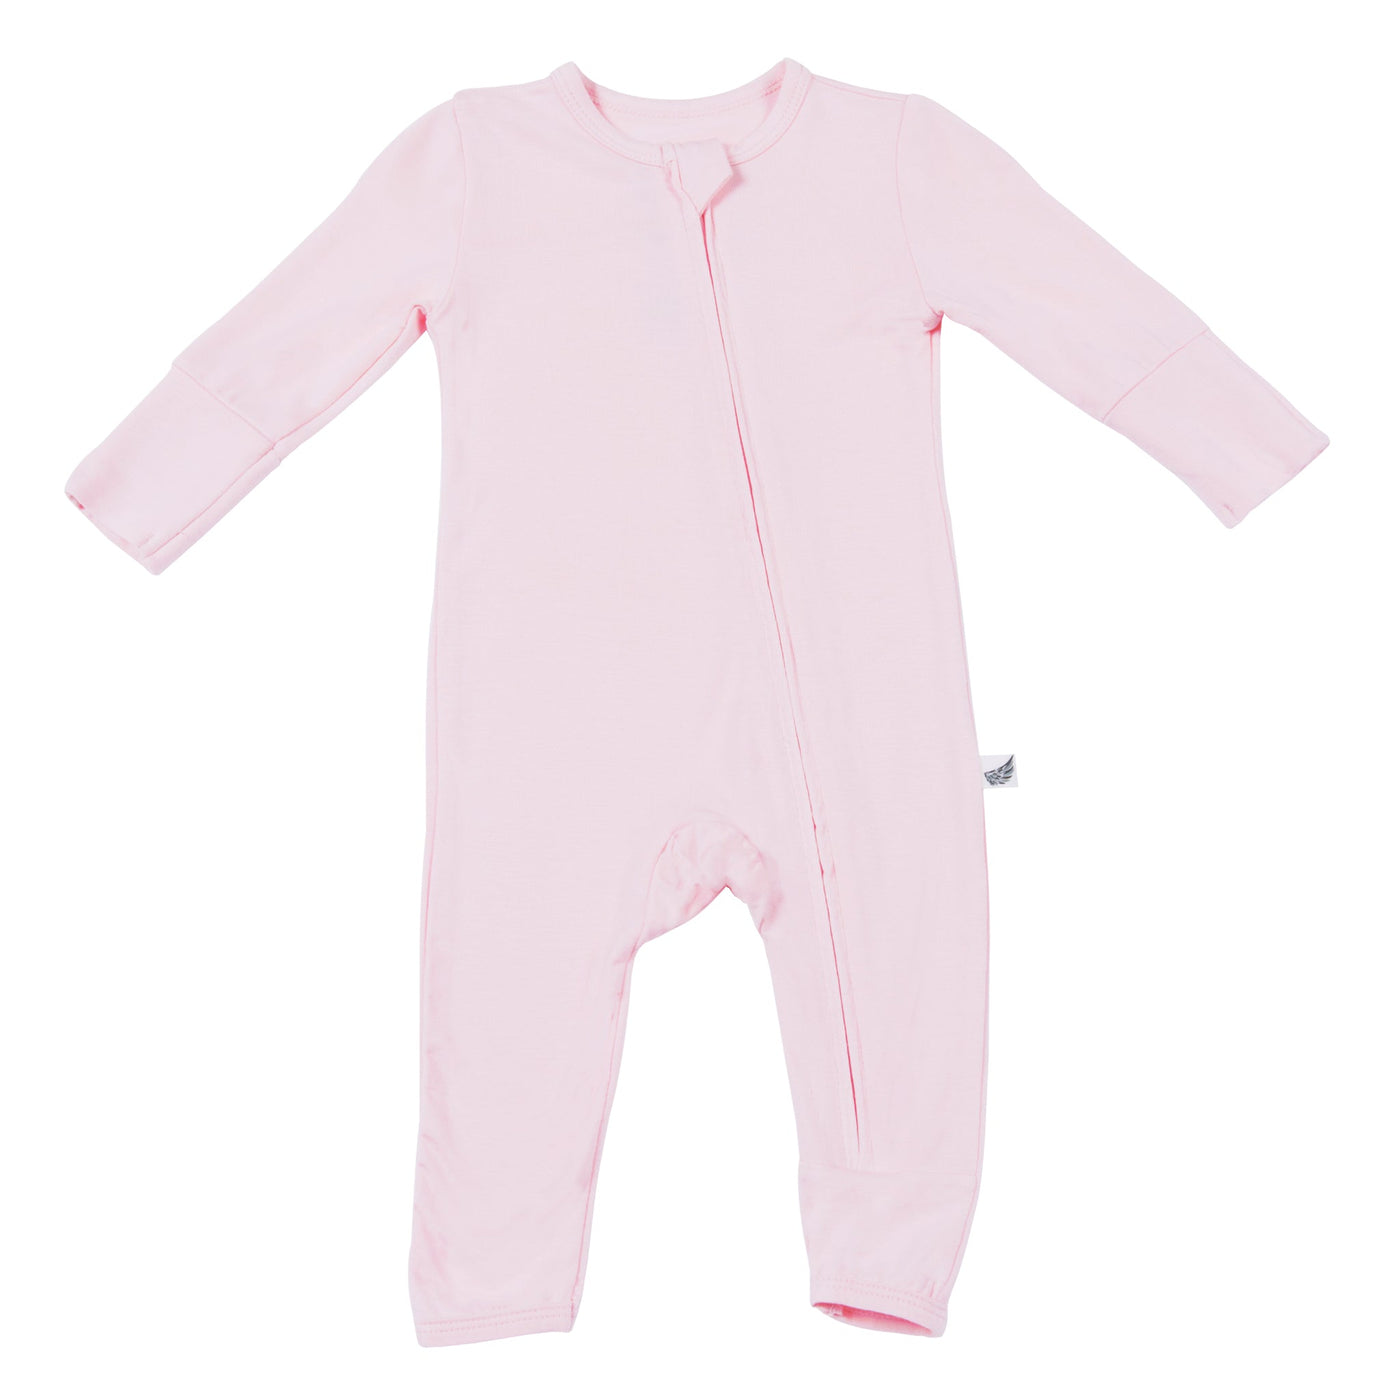 Heavenly Pink Coverall (2T-3T) - Free Birdees